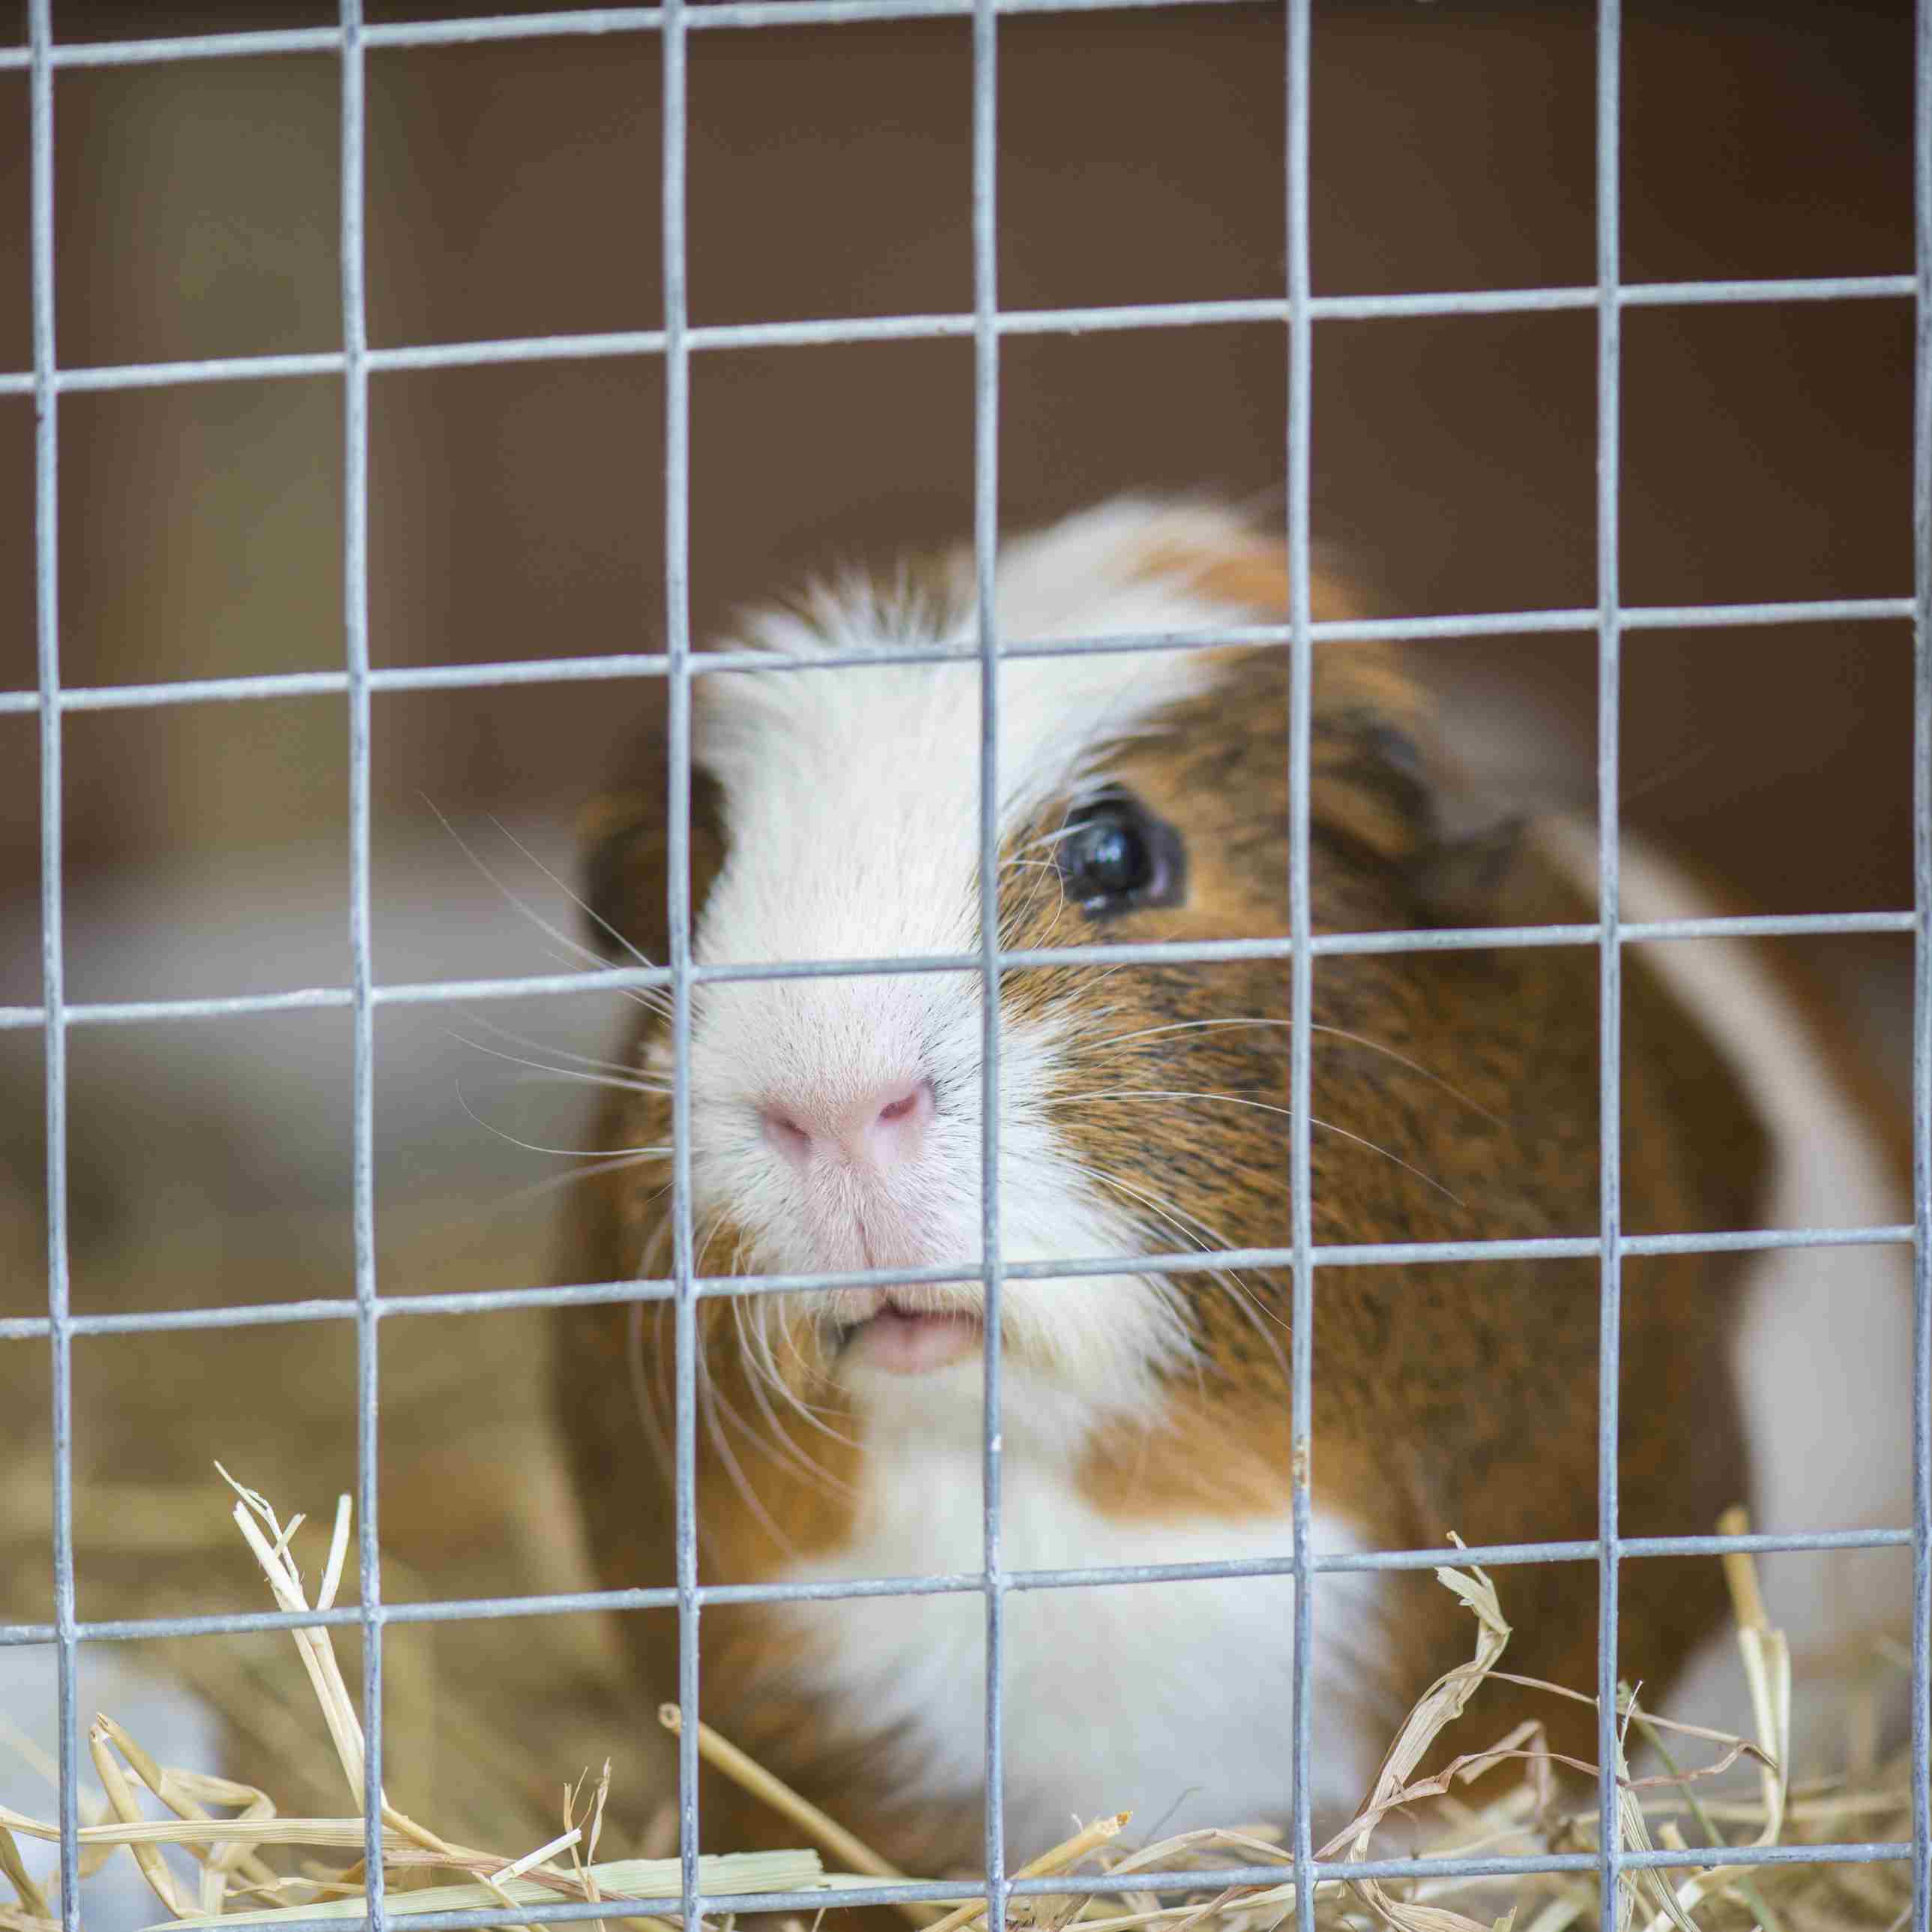 Guinea pig peering out from wire mesh cage